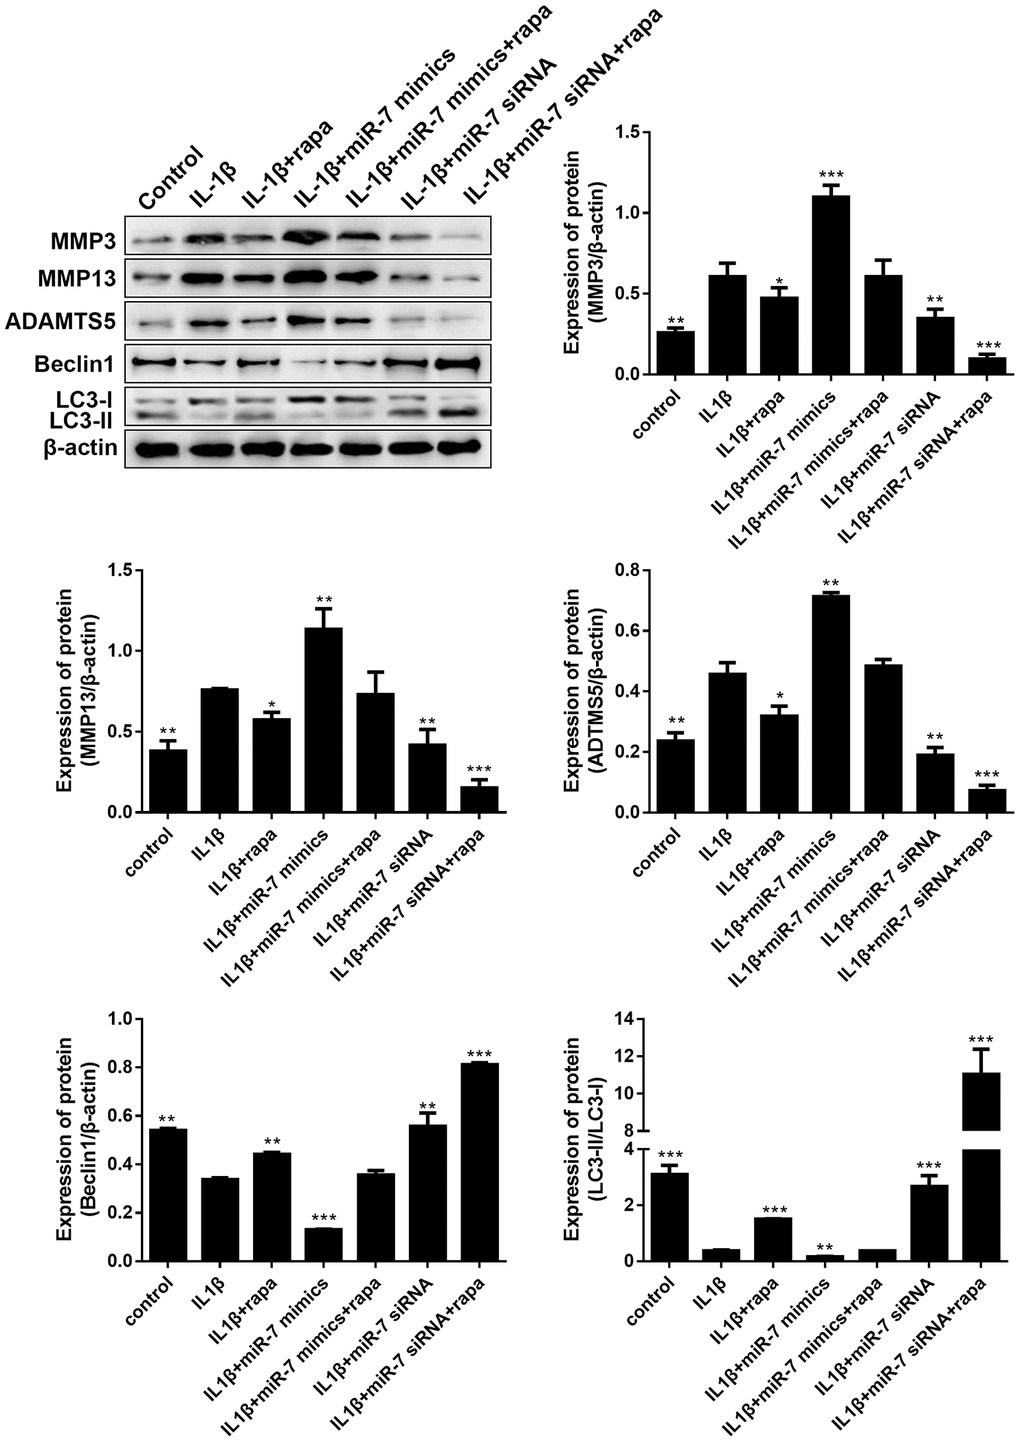 Effects of the PI3K/Akt/mTOR pathway on the expression of cartilage degradation-related proteins and autophagy-related proteins in IL-1β-induced chondrocytes. Representative Western blot analysis and band intensity analysis showing protein levels of MMP3, MMP13, ADAMTS5, Beclin1, and LC3 in chondrocytes that received different treatments. Data represent the mean ± SD (n = 3), * p p p 